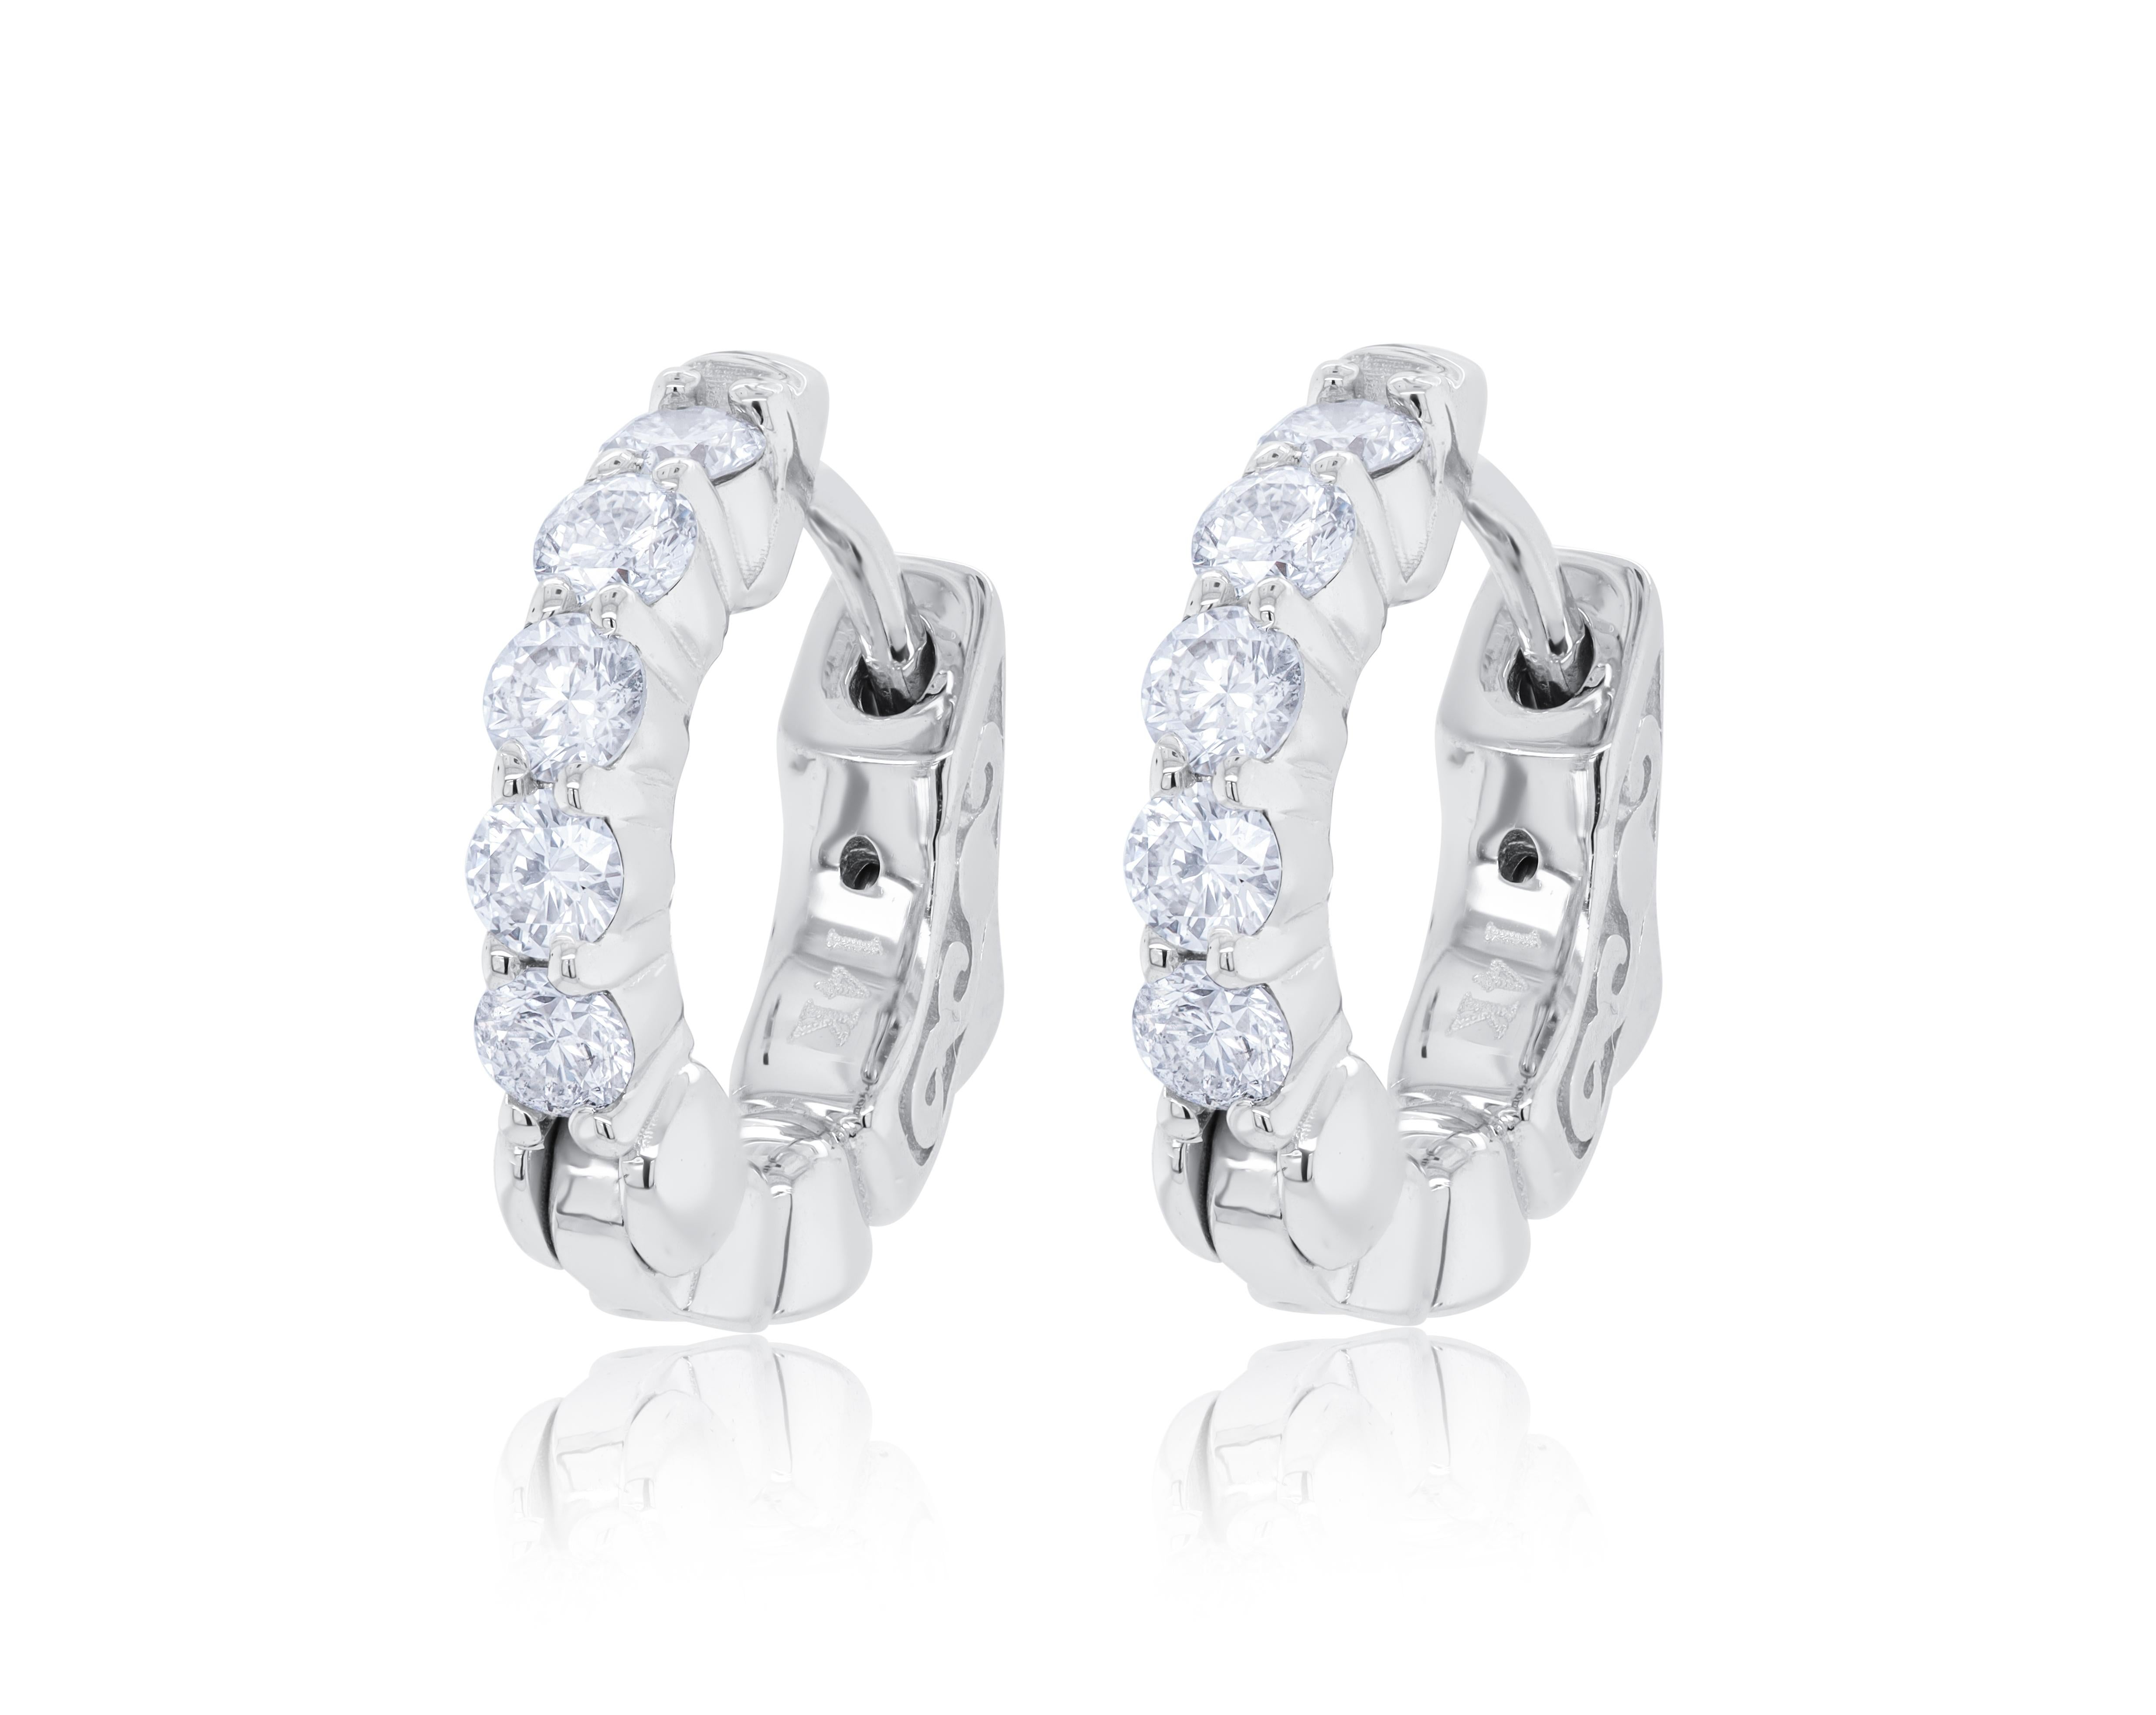 is a leading supplier of top-quality fine jewelry for over 35 years.
